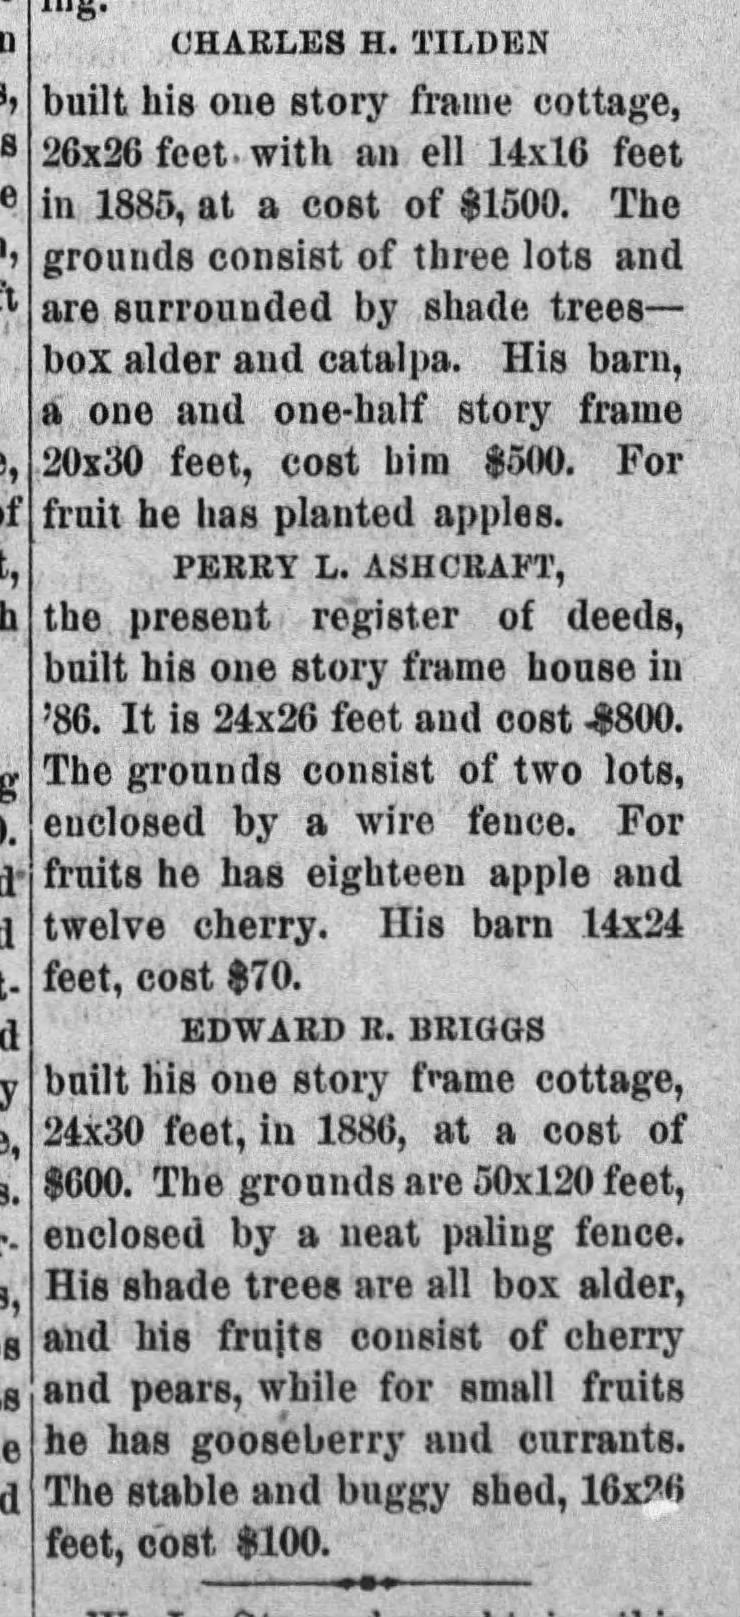 Perry L. Ashcraft builds house in Oberlin, Kansas for $800.